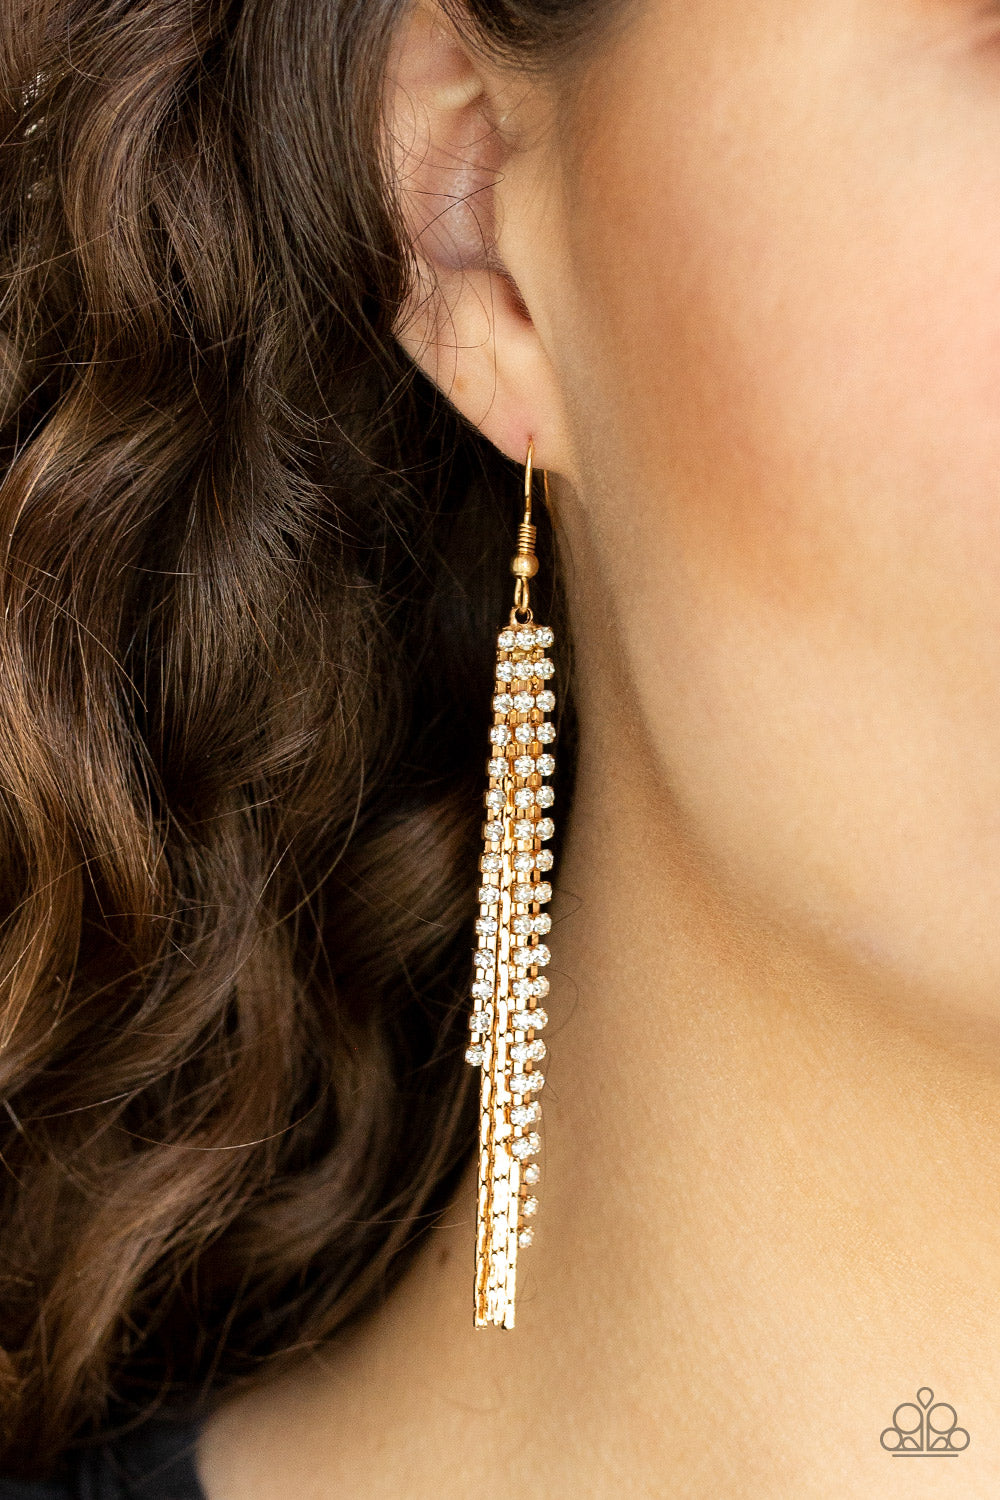 Paparazzi Red Carpet Bombshell - Gold Earrings - A Finishing Touch 